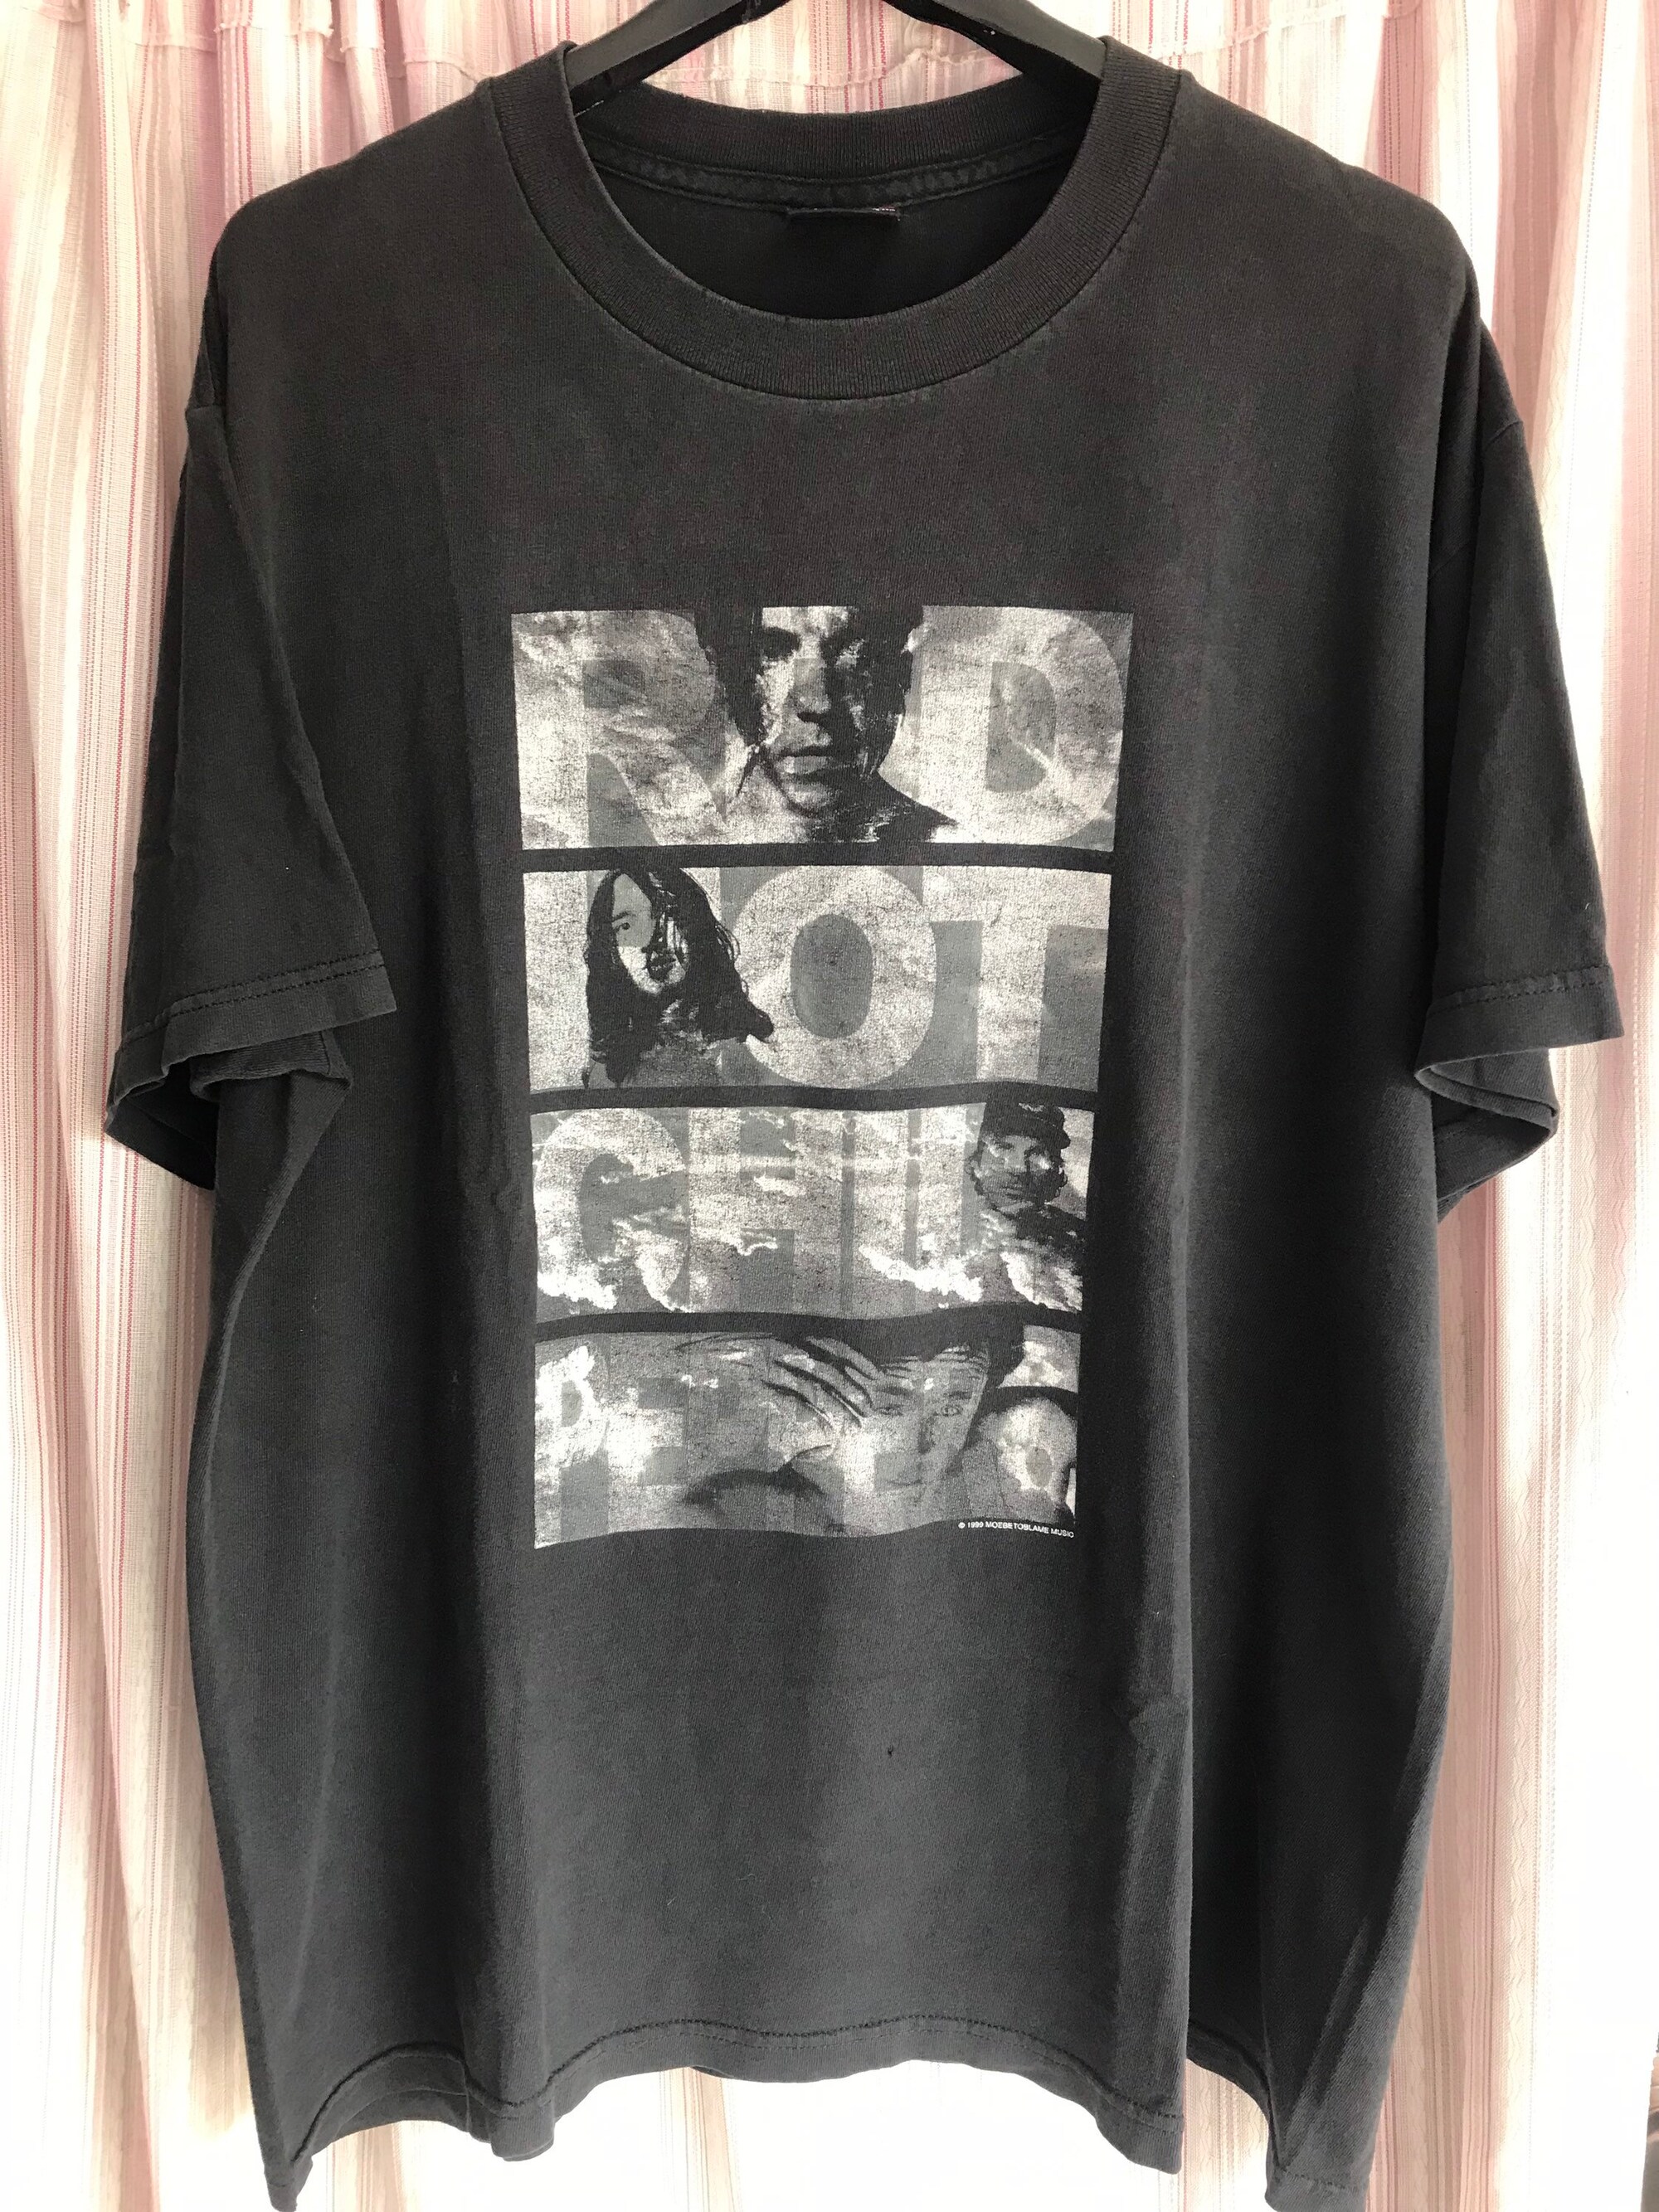 Vintage 1999 Red Hot Chili Peppers shirt